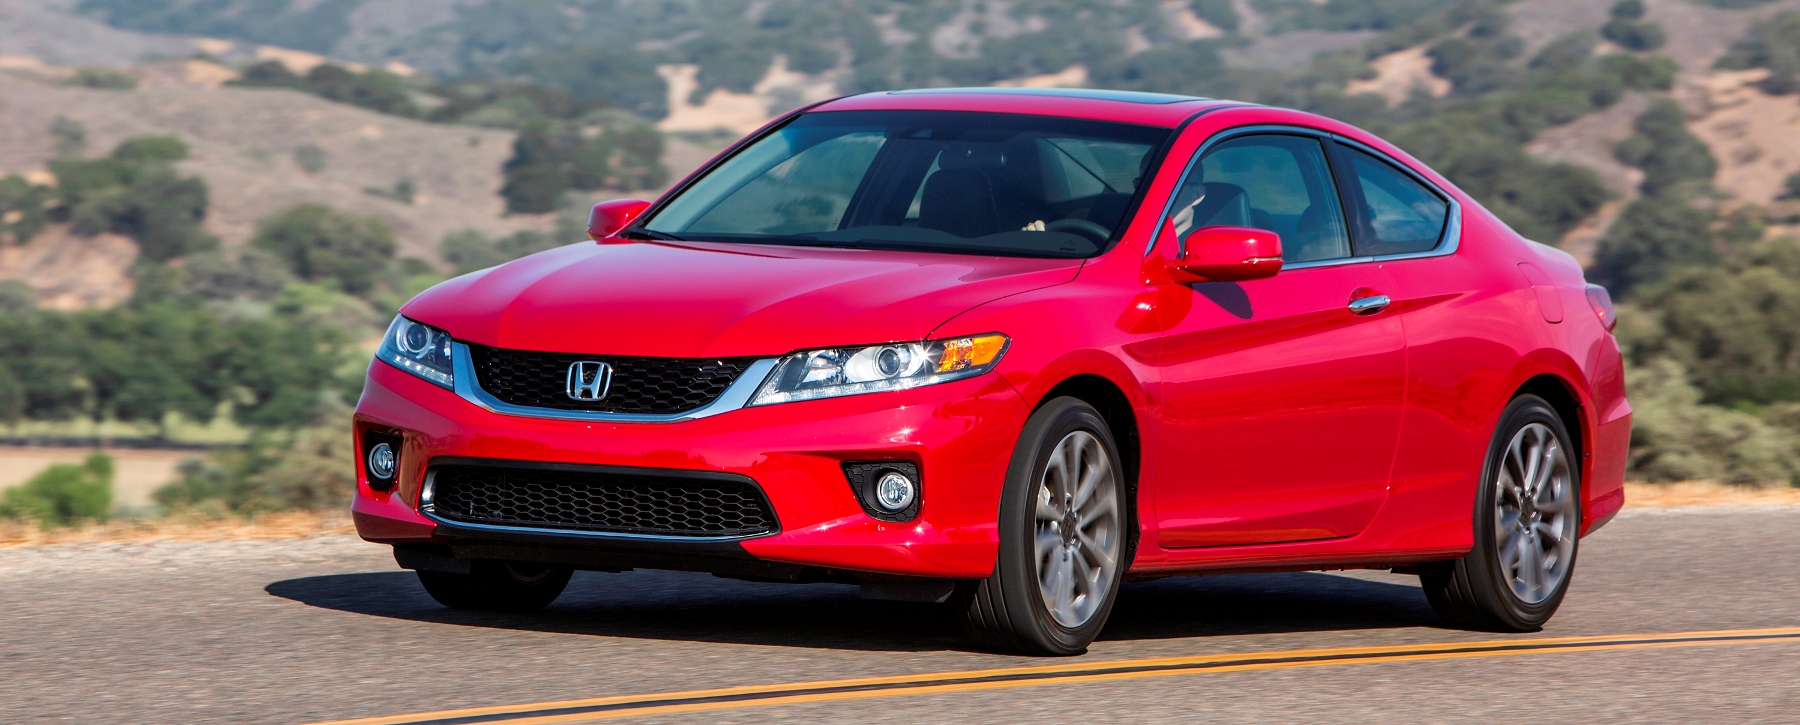 Travel Adventures - 2014 Honda Accord Coupe V6 in the Mountains of the